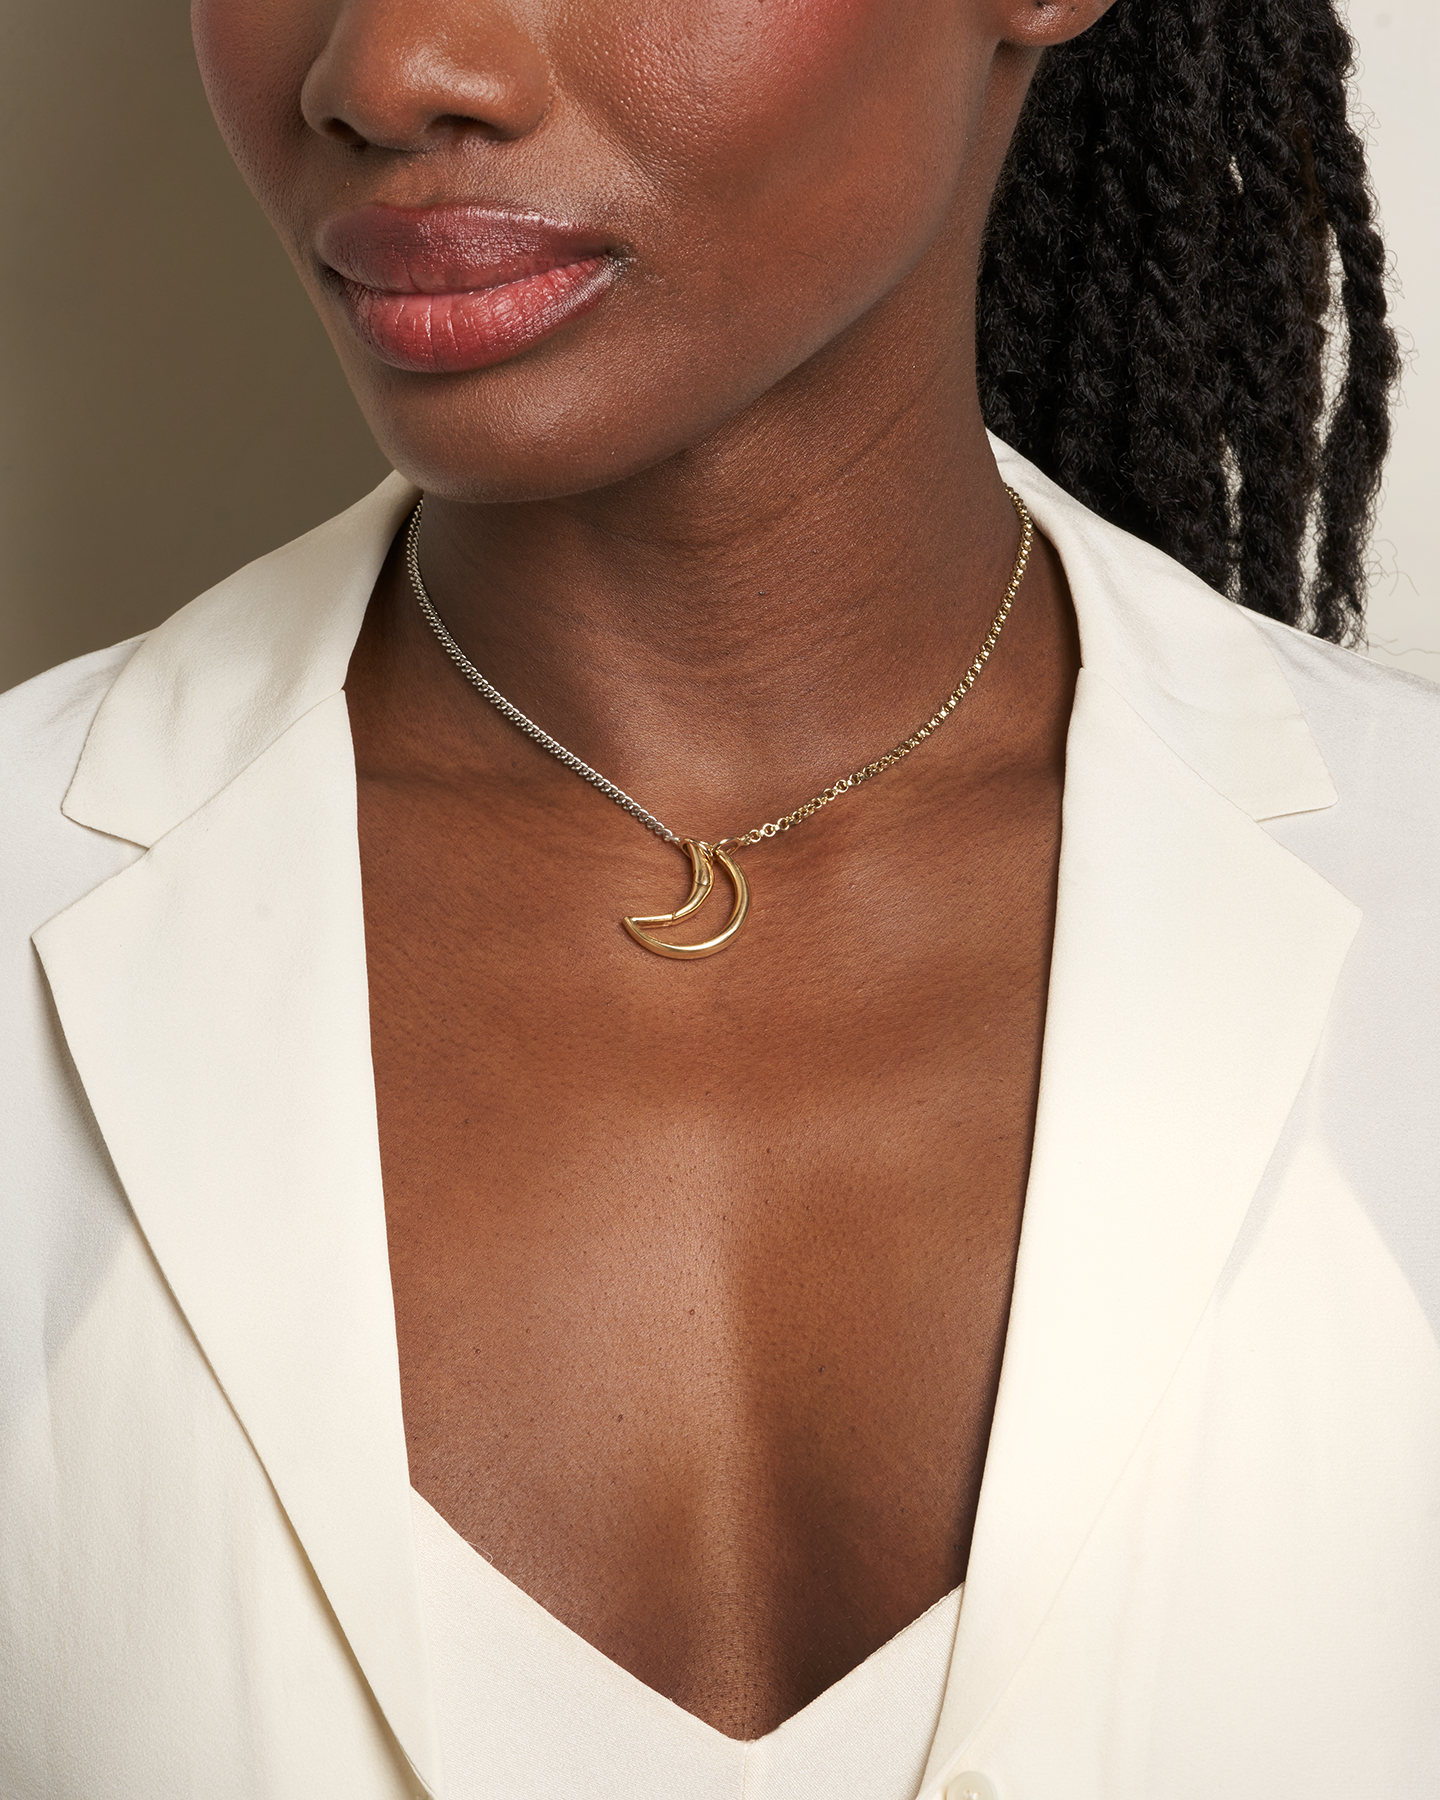 Close up of woman's decolletage wearing necklace with moon lock charm on two-tone chain